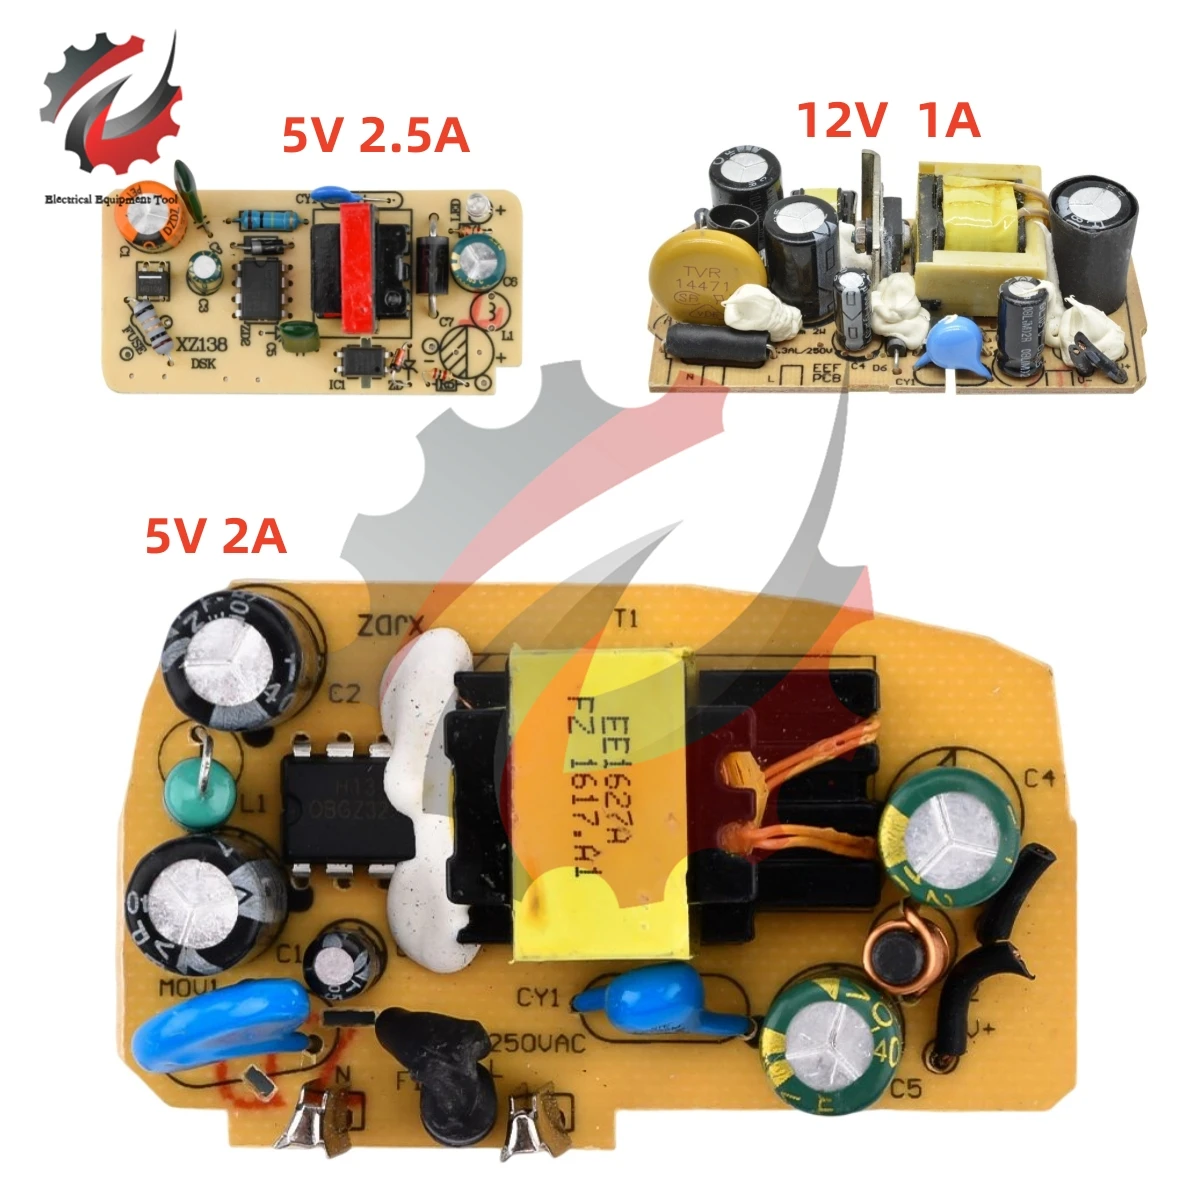 

AC-DC 12V 1A 5V 2A Switching Power Supply Module Bare Circuit 110V 220V to 12V 5V Board TL431 Regulator For Replace/Repair